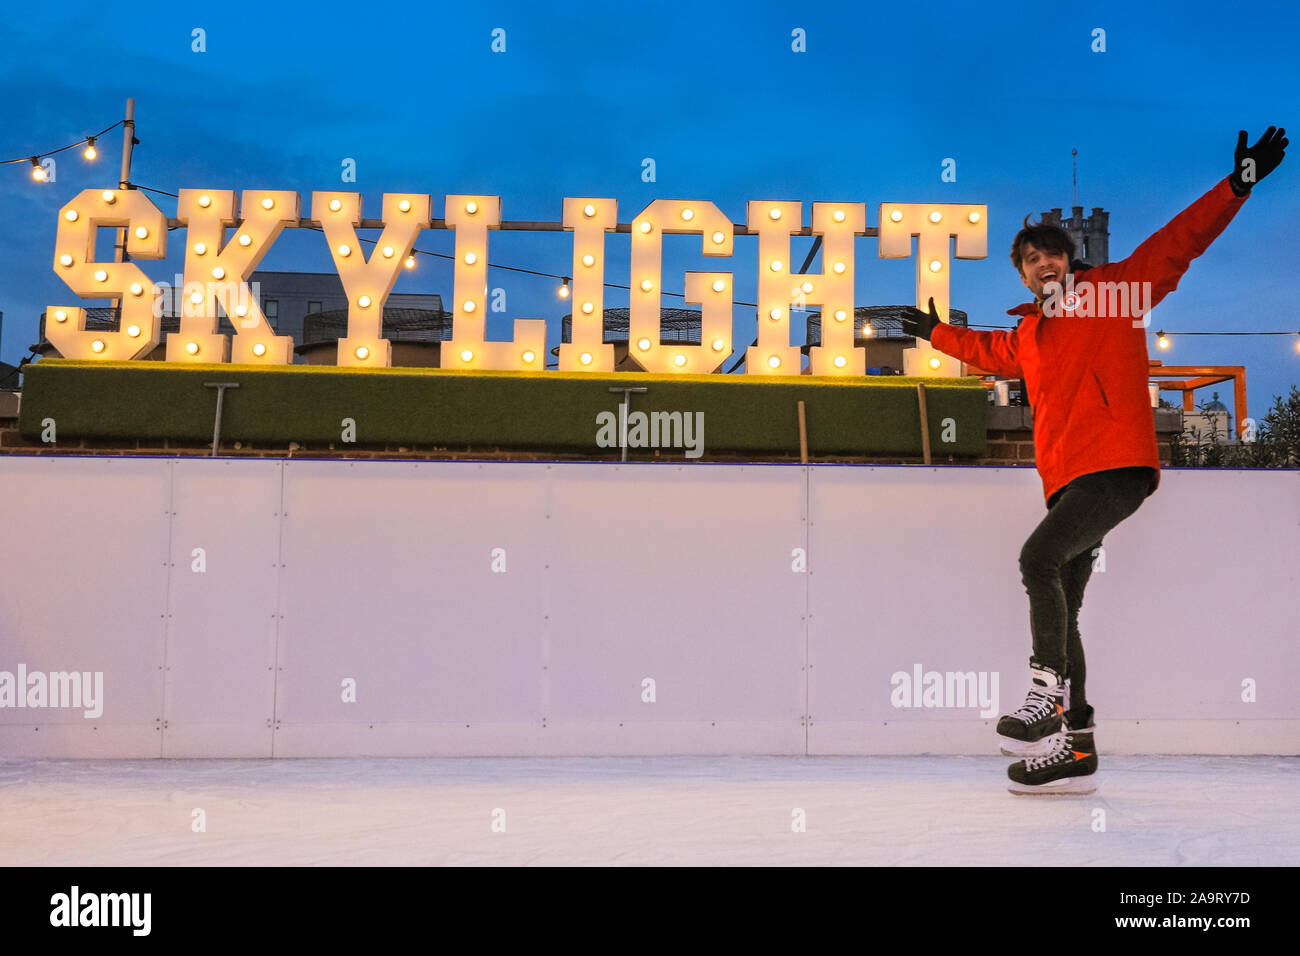 Tobacco Dock, London, UK, 17th November 2019. Skylight staffer Peter goes for a spin on the ice in front of the illuminated 'Skylight' sign. People enjoy spectacular views across to the City of London at London's trendy Skylight ice rink, a rooftop at the historic Tobacco Dock complex in Wapping, East London. Credit: Imageplotter/Alamy Live News Stock Photo